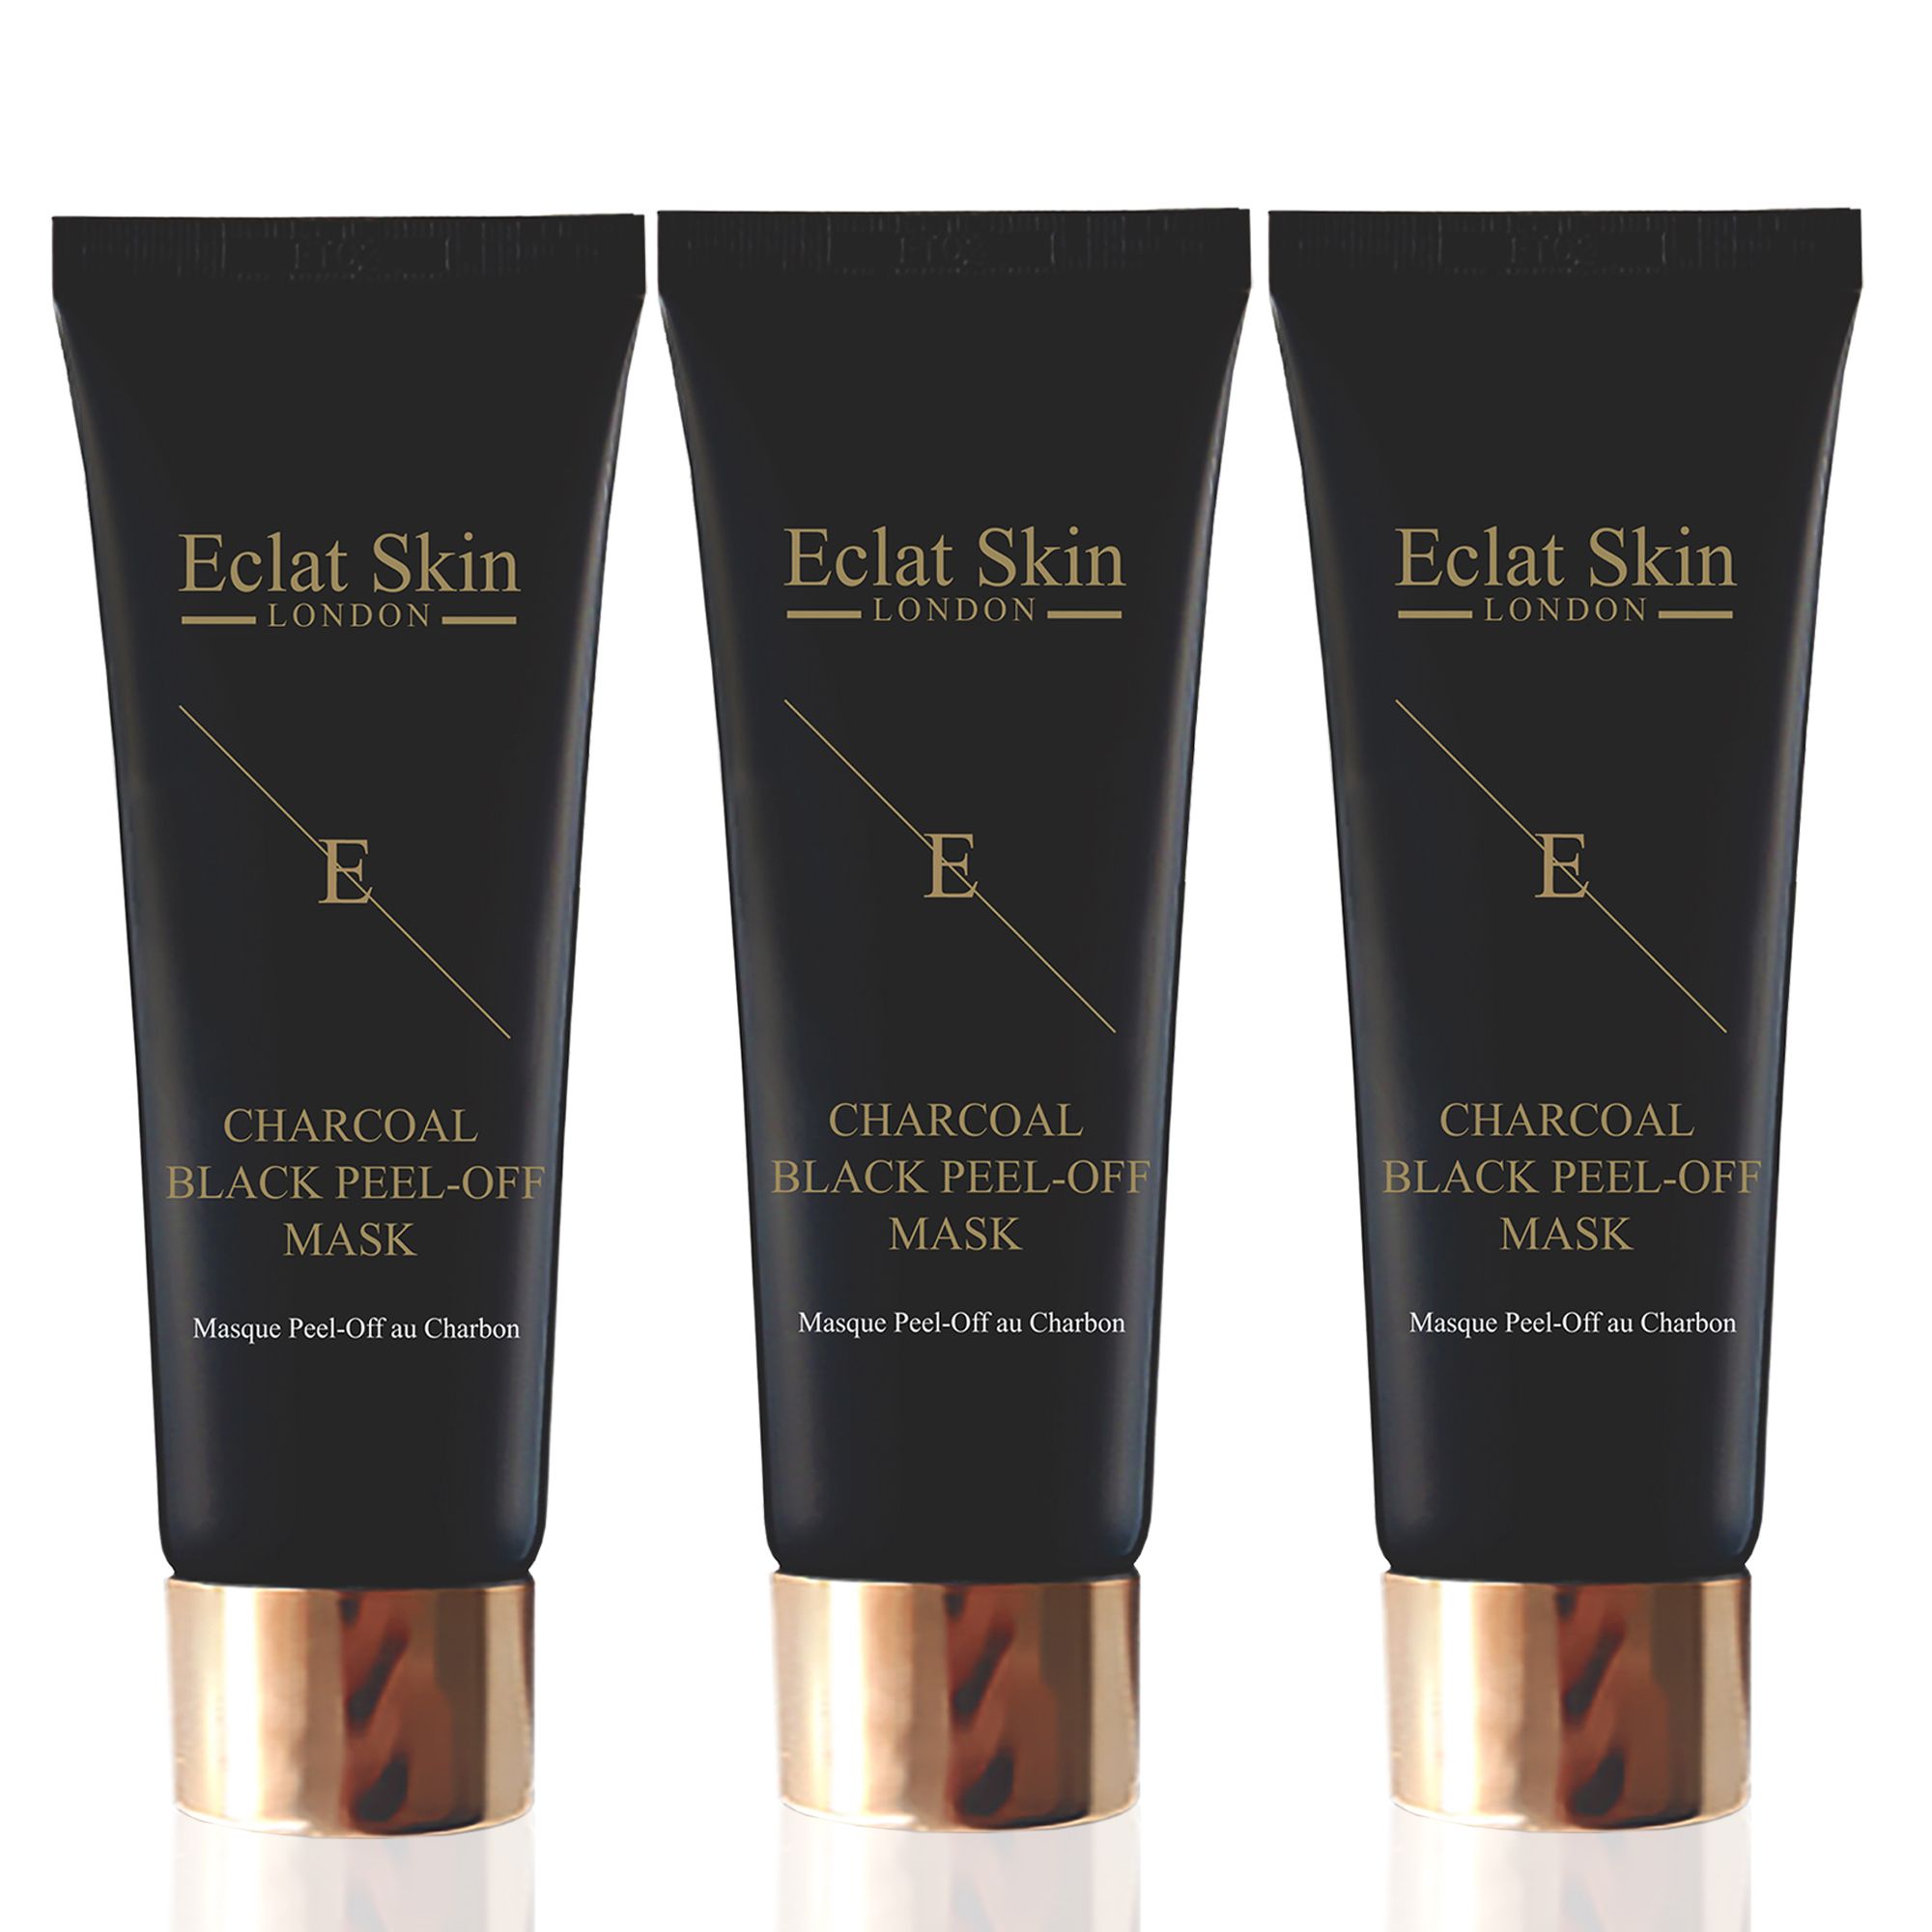 3x Eclat Skin Londonâ€™s Purifying Black Peel-Off Mask aims to purify, cleanse and retextures the top layer of the skin. Containing natural bamboo charcoal and white peony root extract this peel of mask is a great treatment for dull, tired looking skin with imperfections. The formula is sticky black gel that is easy to apply even layer to the skin.

Key Ingredients:

BAMBOO CHARCOAL
Bamboo Charcoal has a long history of use first documented in China in 1486 AD, during the Ming Dynasty. The Activated Bamboo Charcoal is so fine that it can act like a magnet to capture and trap toxins and excess oil by adhering them to itself.Â 

WHITE PEONY ROOT EXTRACT
White Peony root extract aims to sooth and moisturise the skin. It is anti-bacterial and works to promote skin healing.

GLYCERIN
Glycerin mimics whatâ€™s known as skinâ€™s natural moisturising factor (NMF), which is why itâ€™s compatible with all skin types, of all ages. It also helps the skin to shield from environmental sources of irritation and aims to Improve skinâ€™s resiliency and youthful look.

Directions for use: Apply thick opaque even layer to clean, dry skin. Avoid eye area, eyebrows, hairline and lips. Leave on for 15 - 30 minutes or until completely dry. Peel off from the edges gently. Use once or twice a week.